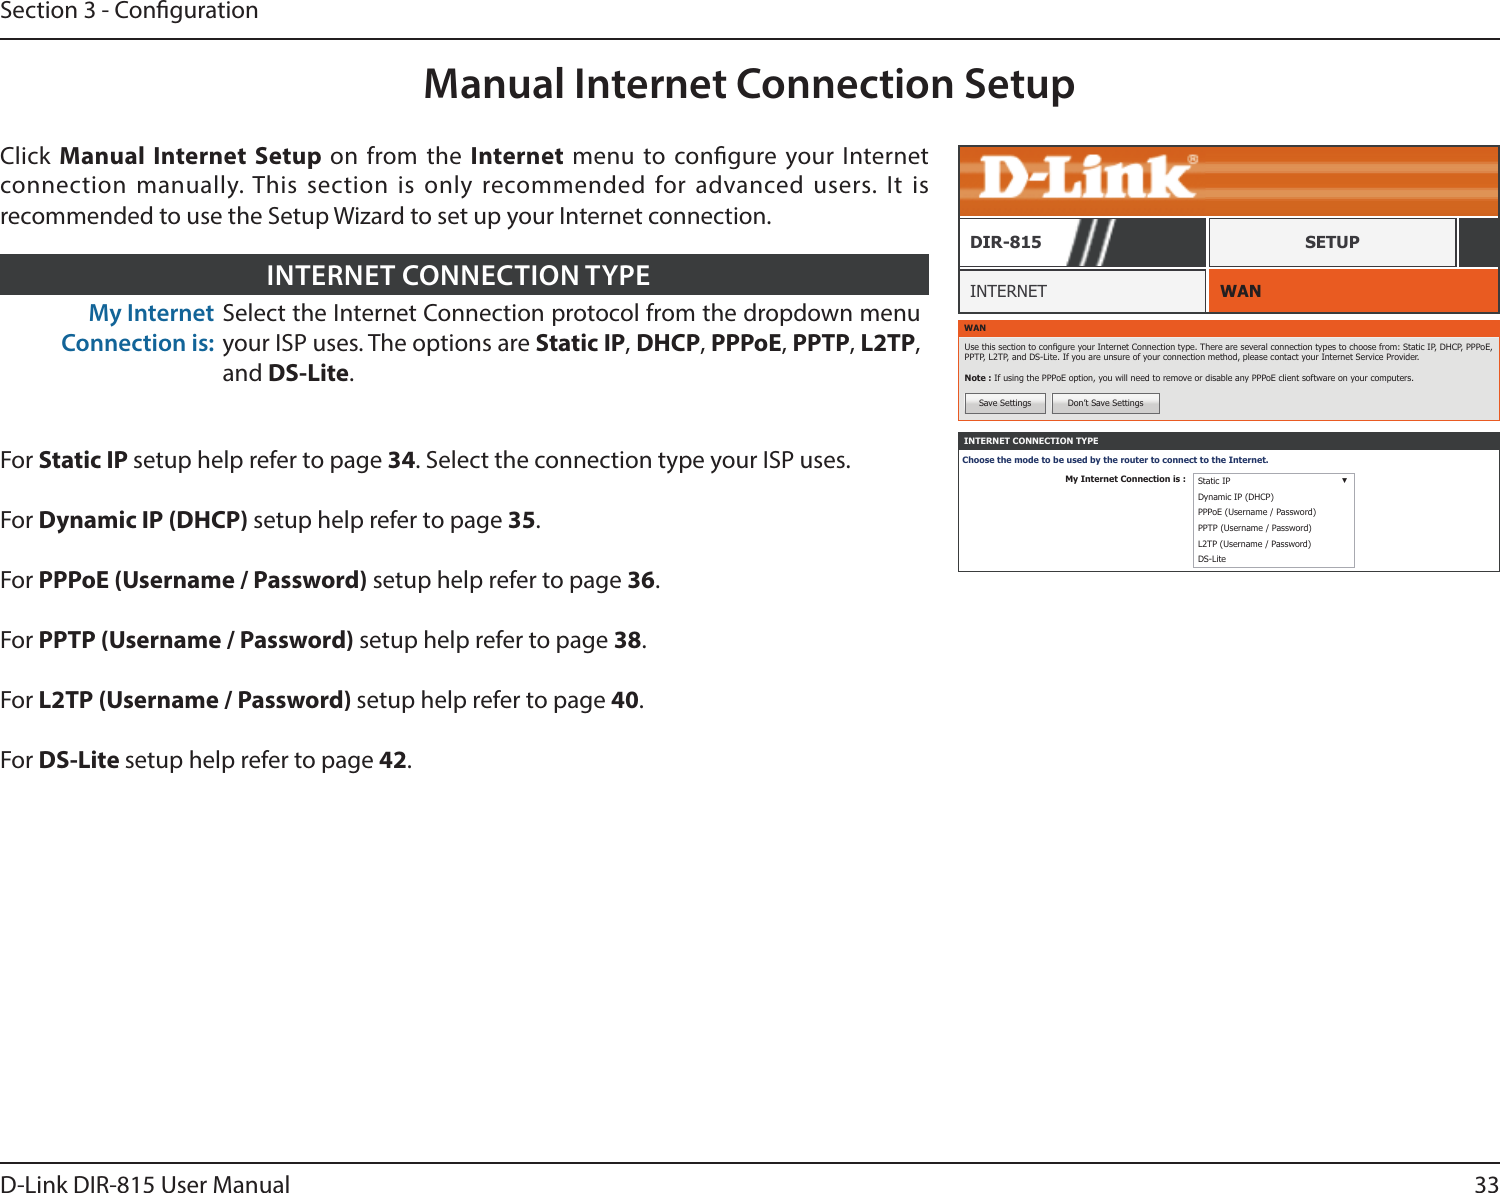 33D-Link DIR-815 User ManualSection 3 - CongurationManual Internet Connection SetupWANINTERNETDIR-815 SETUPWANUse this section to congure your Internet Connection type. There are several connection types to choose from: Static IP, DHCP, PPPoE, PPTP, L2TP, and DS-Lite. If you are unsure of your connection method, please contact your Internet Service Provider.Note : If using the PPPoE option, you will need to remove or disable any PPPoE client software on your computers.Save Settings Don’t Save SettingsINTERNET CONNECTION TYPEChoose the mode to be used by the router to connect to the Internet.My Internet Connection is : Static IP ▼Dynamic IP (DHCP)PPPoE (Username / Password)PPTP (Username / Password)L2TP (Username / Password)DS-LiteClick  Manual Internet Setup on from the Internet menu to congure your Internet connection manually. This section is only recommended for advanced users. It is recommended to use the Setup Wizard to set up your Internet connection.My Internet Connection is:Select the Internet Connection protocol from the dropdown menu your ISP uses. The options are Static IP, DHCP, PPPoE, PPTP, L2TP, and DS-Lite.INTERNET CONNECTION TYPEFor Static IP setup help refer to page 34. Select the connection type your ISP uses.For Dynamic IP (DHCP) setup help refer to page 35.For PPPoE (Username / Password) setup help refer to page 36.For PPTP (Username / Password) setup help refer to page 38.For L2TP (Username / Password) setup help refer to page 40.For DS-Lite setup help refer to page 42.